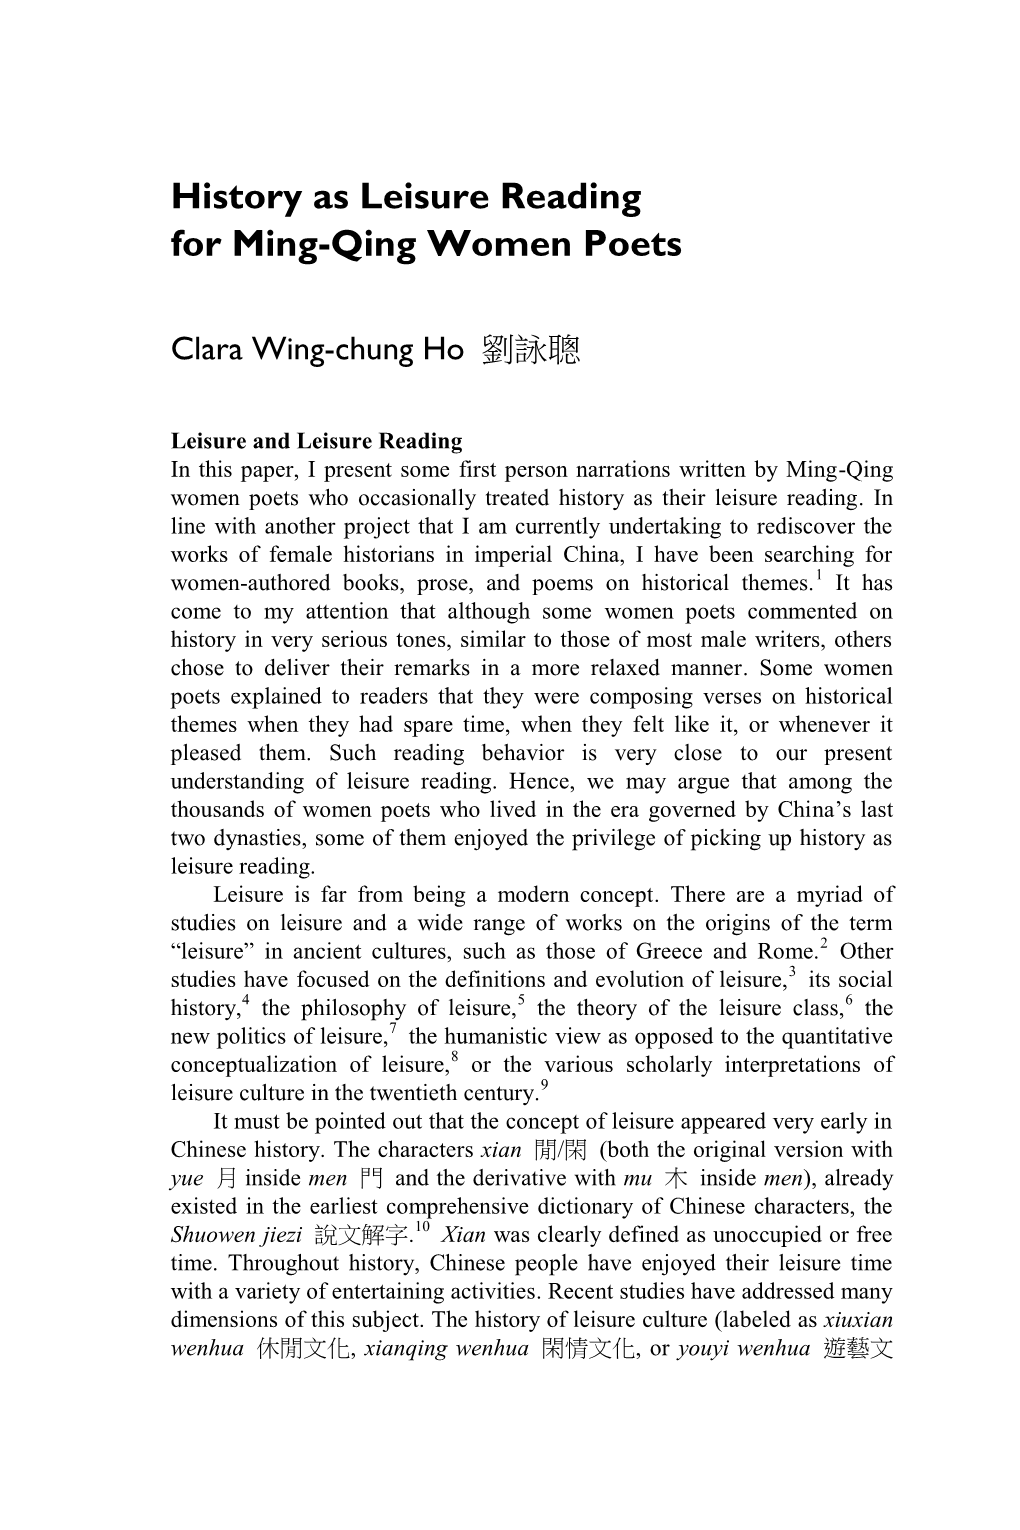 History As Leisure Reading for Ming-Qing Women Poets